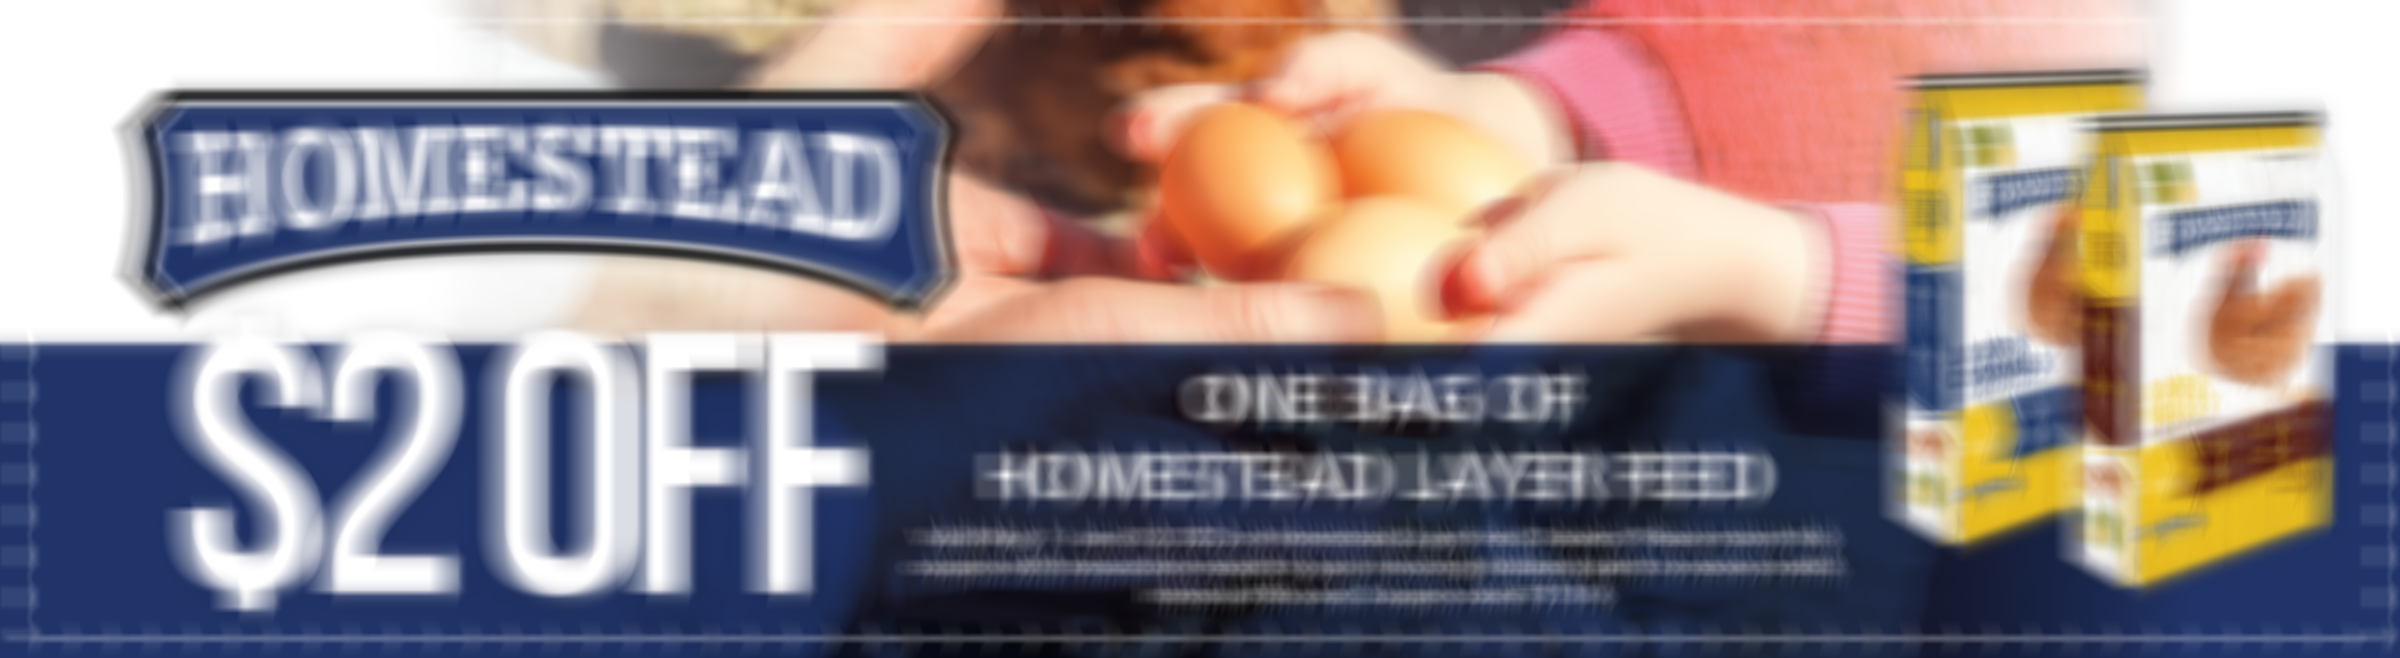 Homestead-Layer-Feed-Digital-Coupon-2400x658_blurry